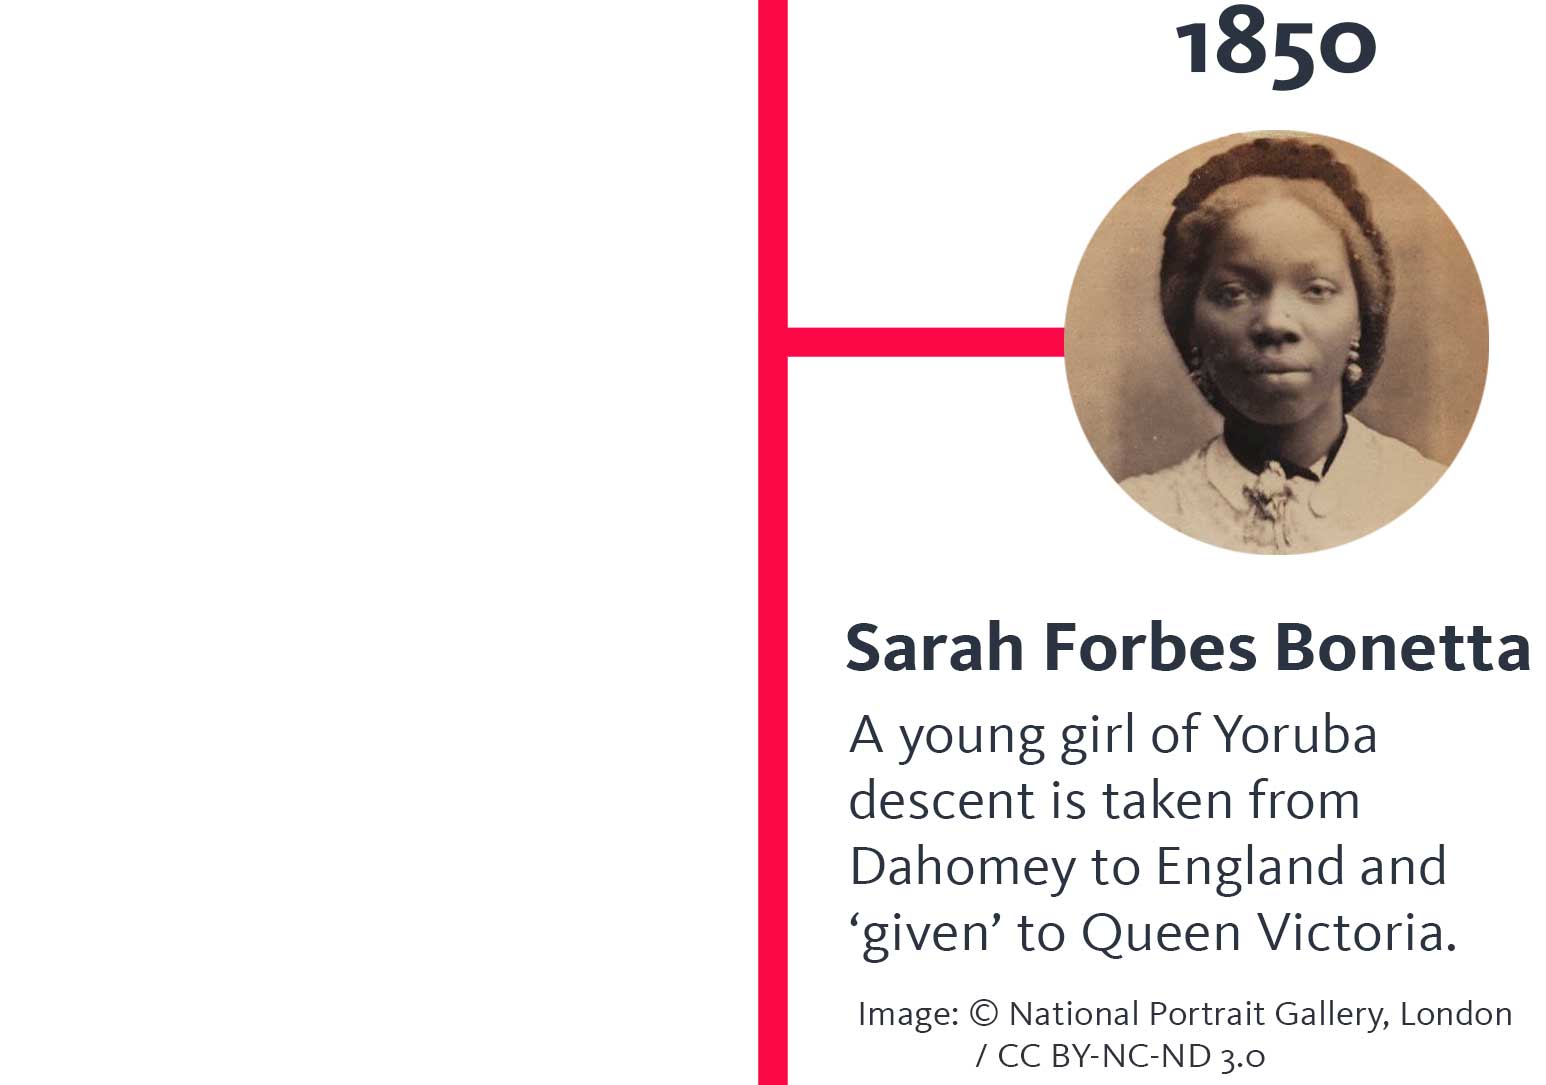 The year '1850' appears above a photo of a young woman with a serious expression on her face. A heading below says 'Sarah Forbes Bonetta', and text below that says 'A young girl of Yoruba descent is taken from Dahomey to England and 'given' to Queen Victoria.' and below that, 'Image © National Portrait Gallery, London / CC BY-NC-ND 3.0', and a button says 'Explore her story'.